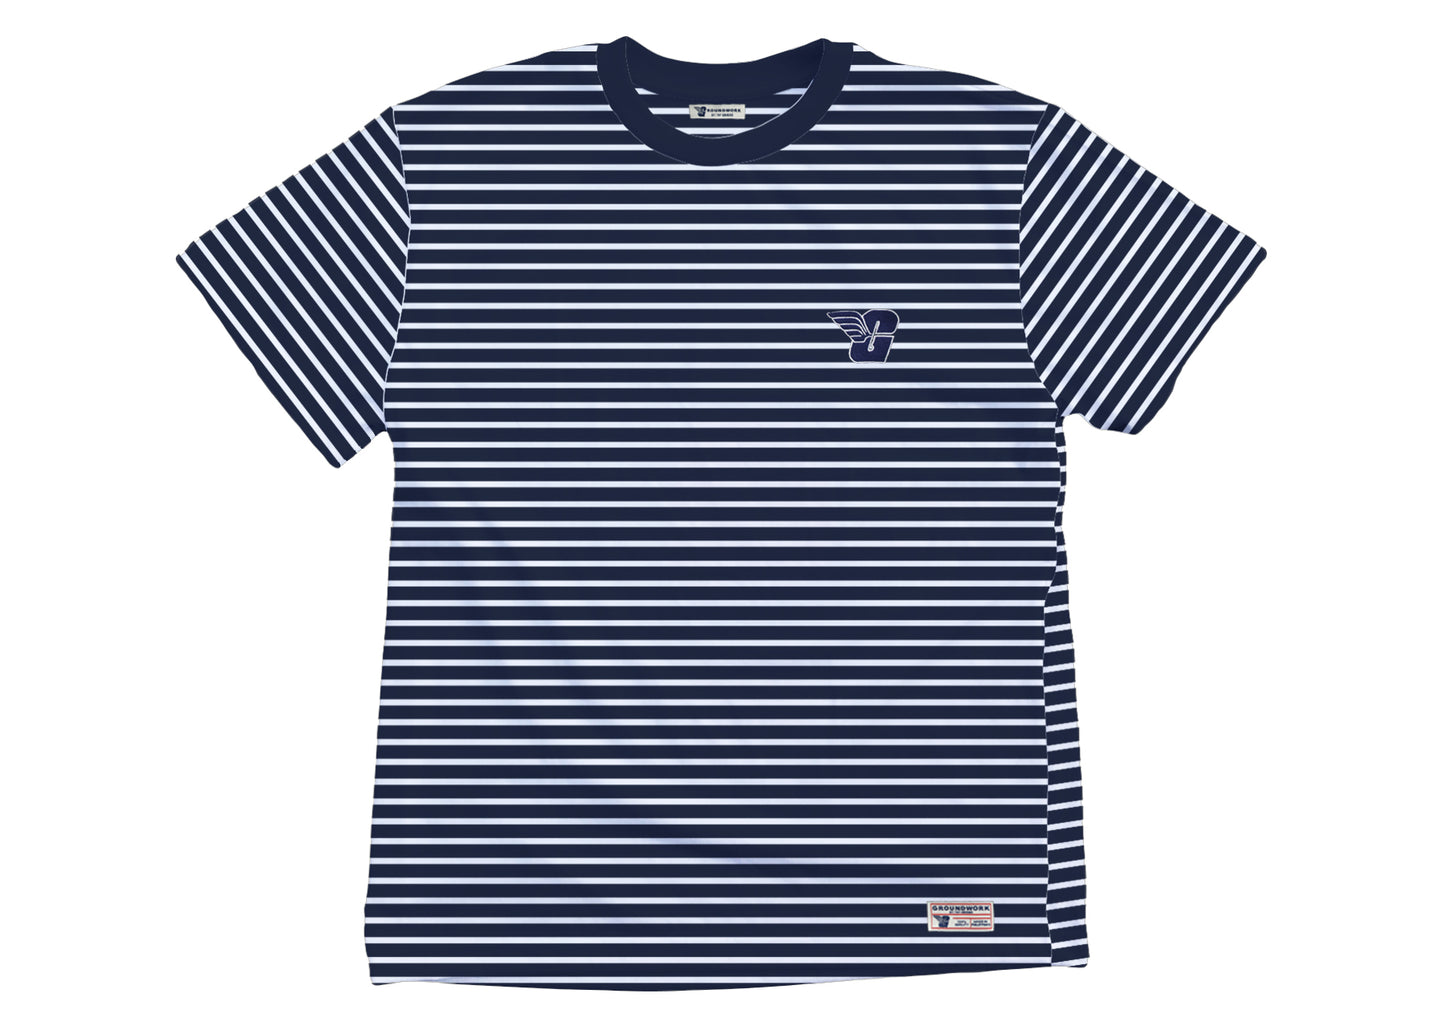 90s Embroidered Striped Tee (Navy Blue)